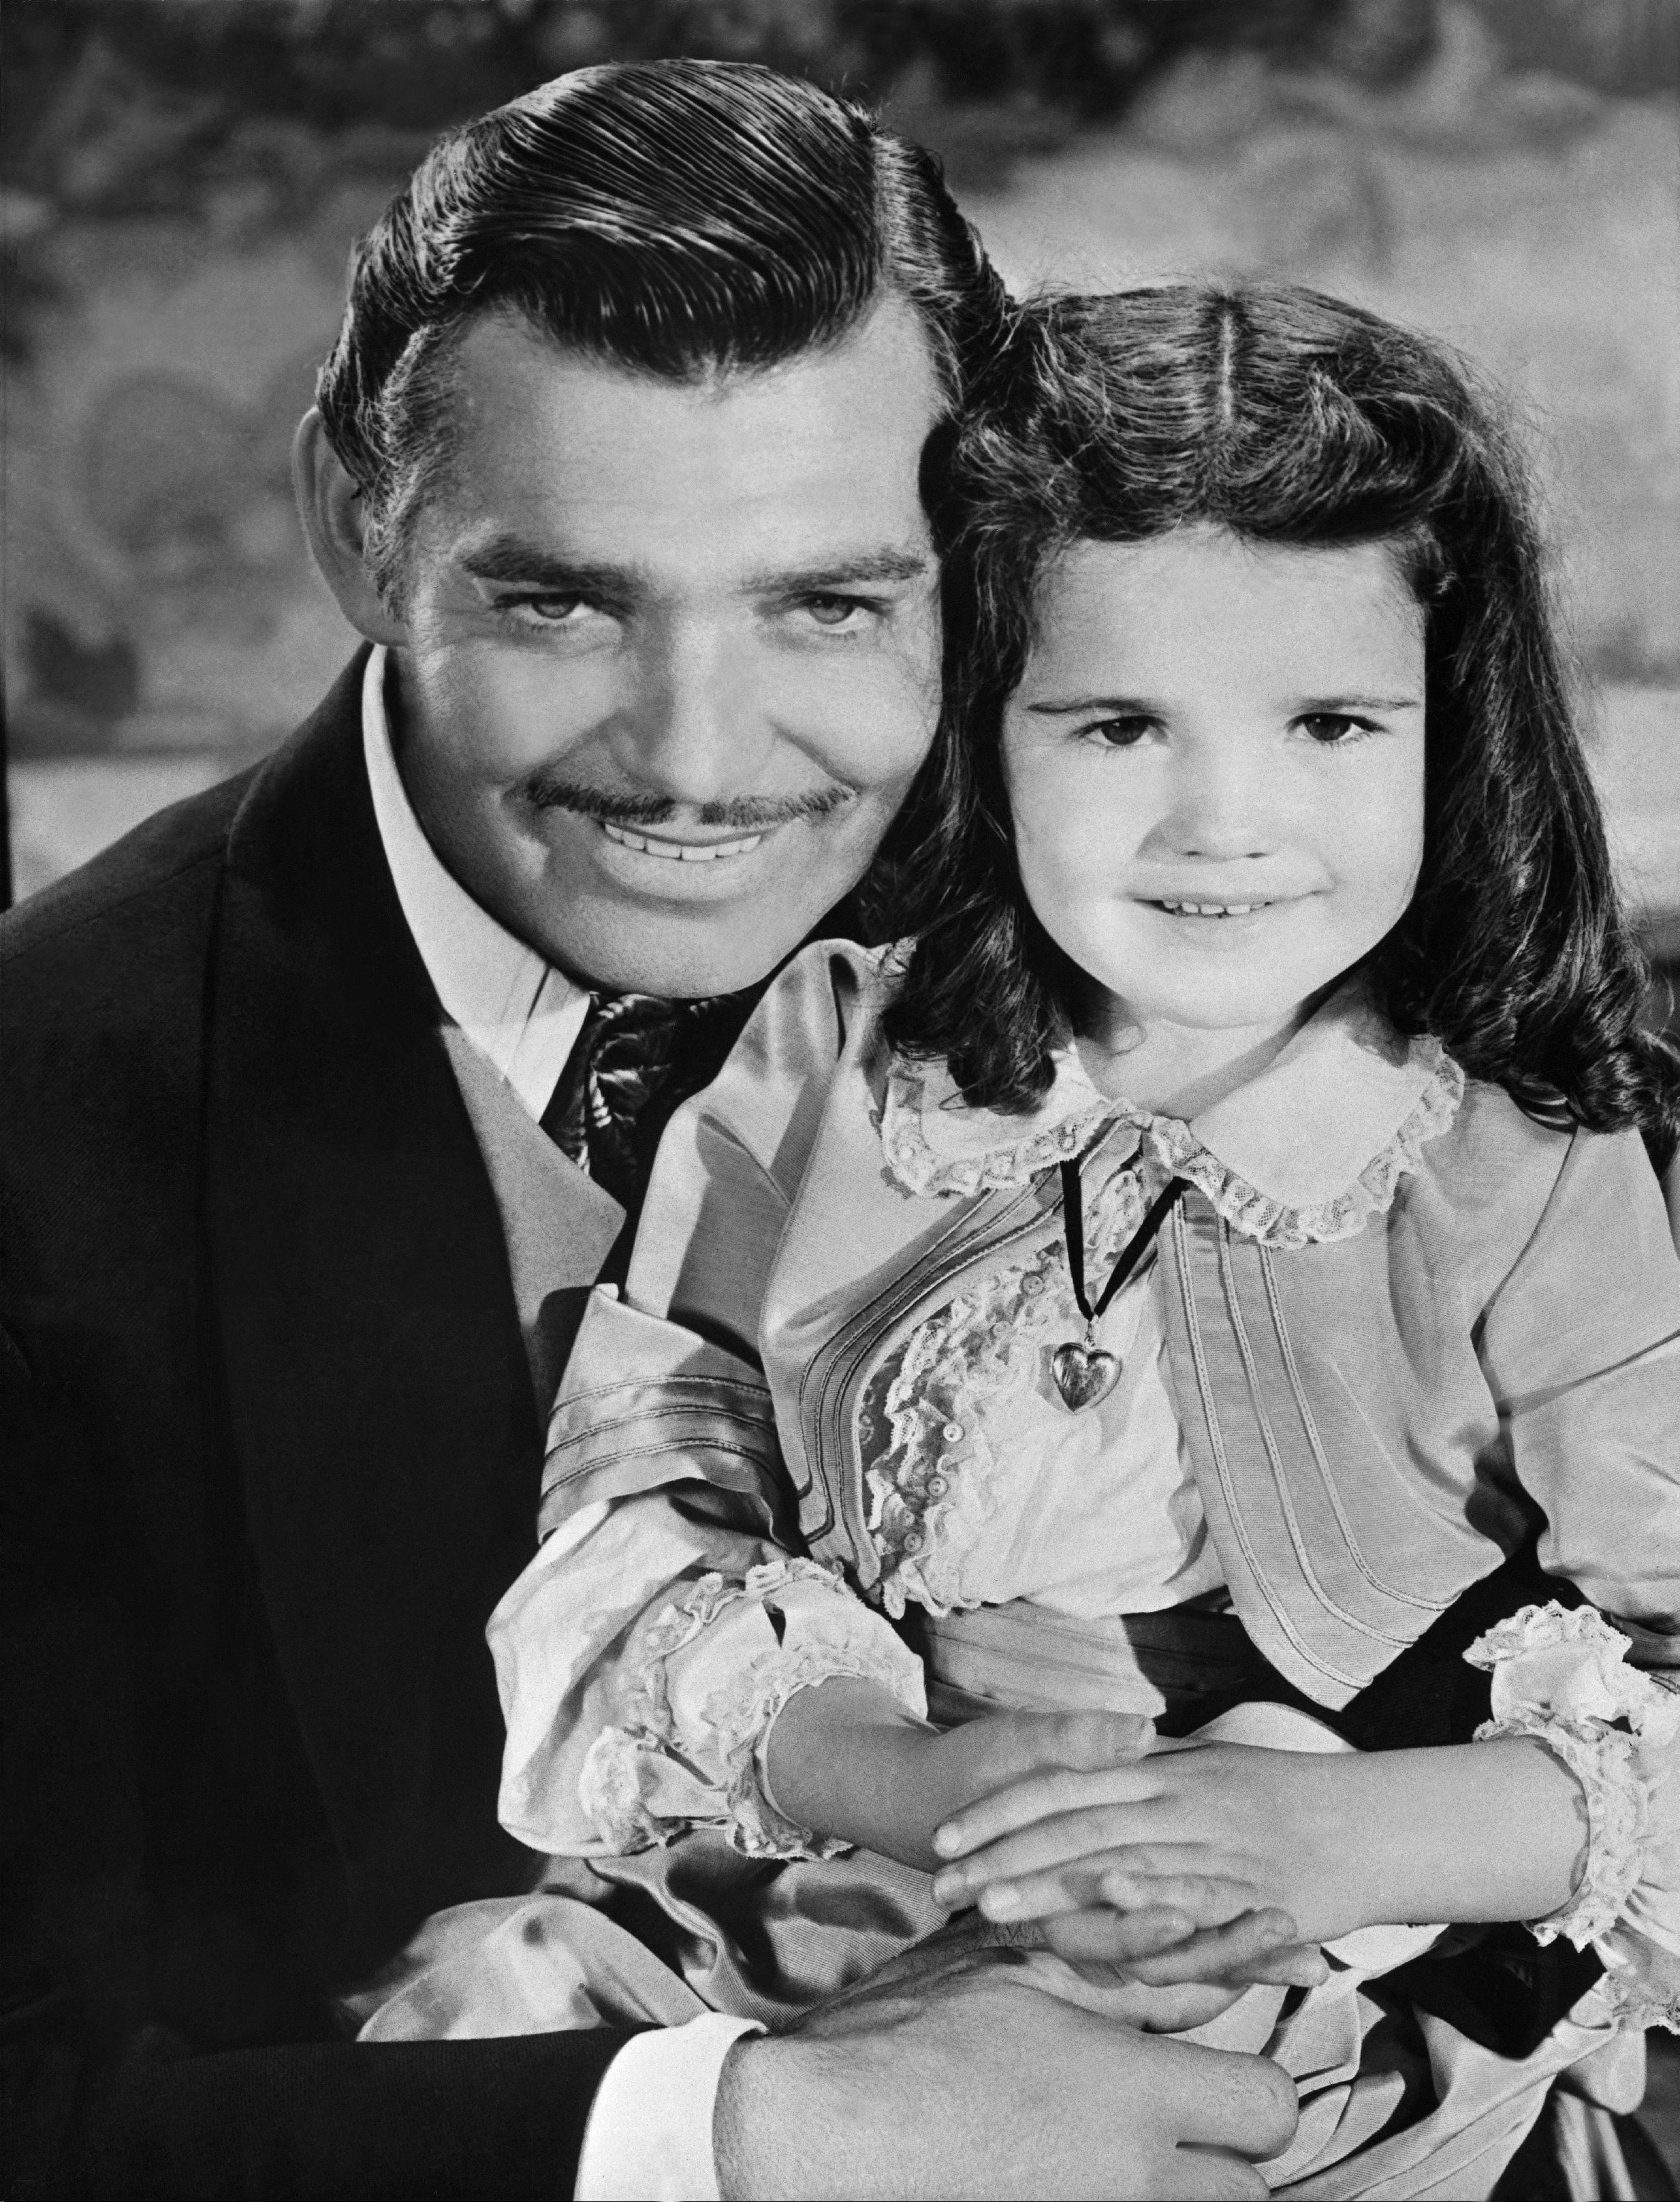 Clark Gable and Cammie King acting in "Gone With the Wind" in 1939. | Source: Getty Images